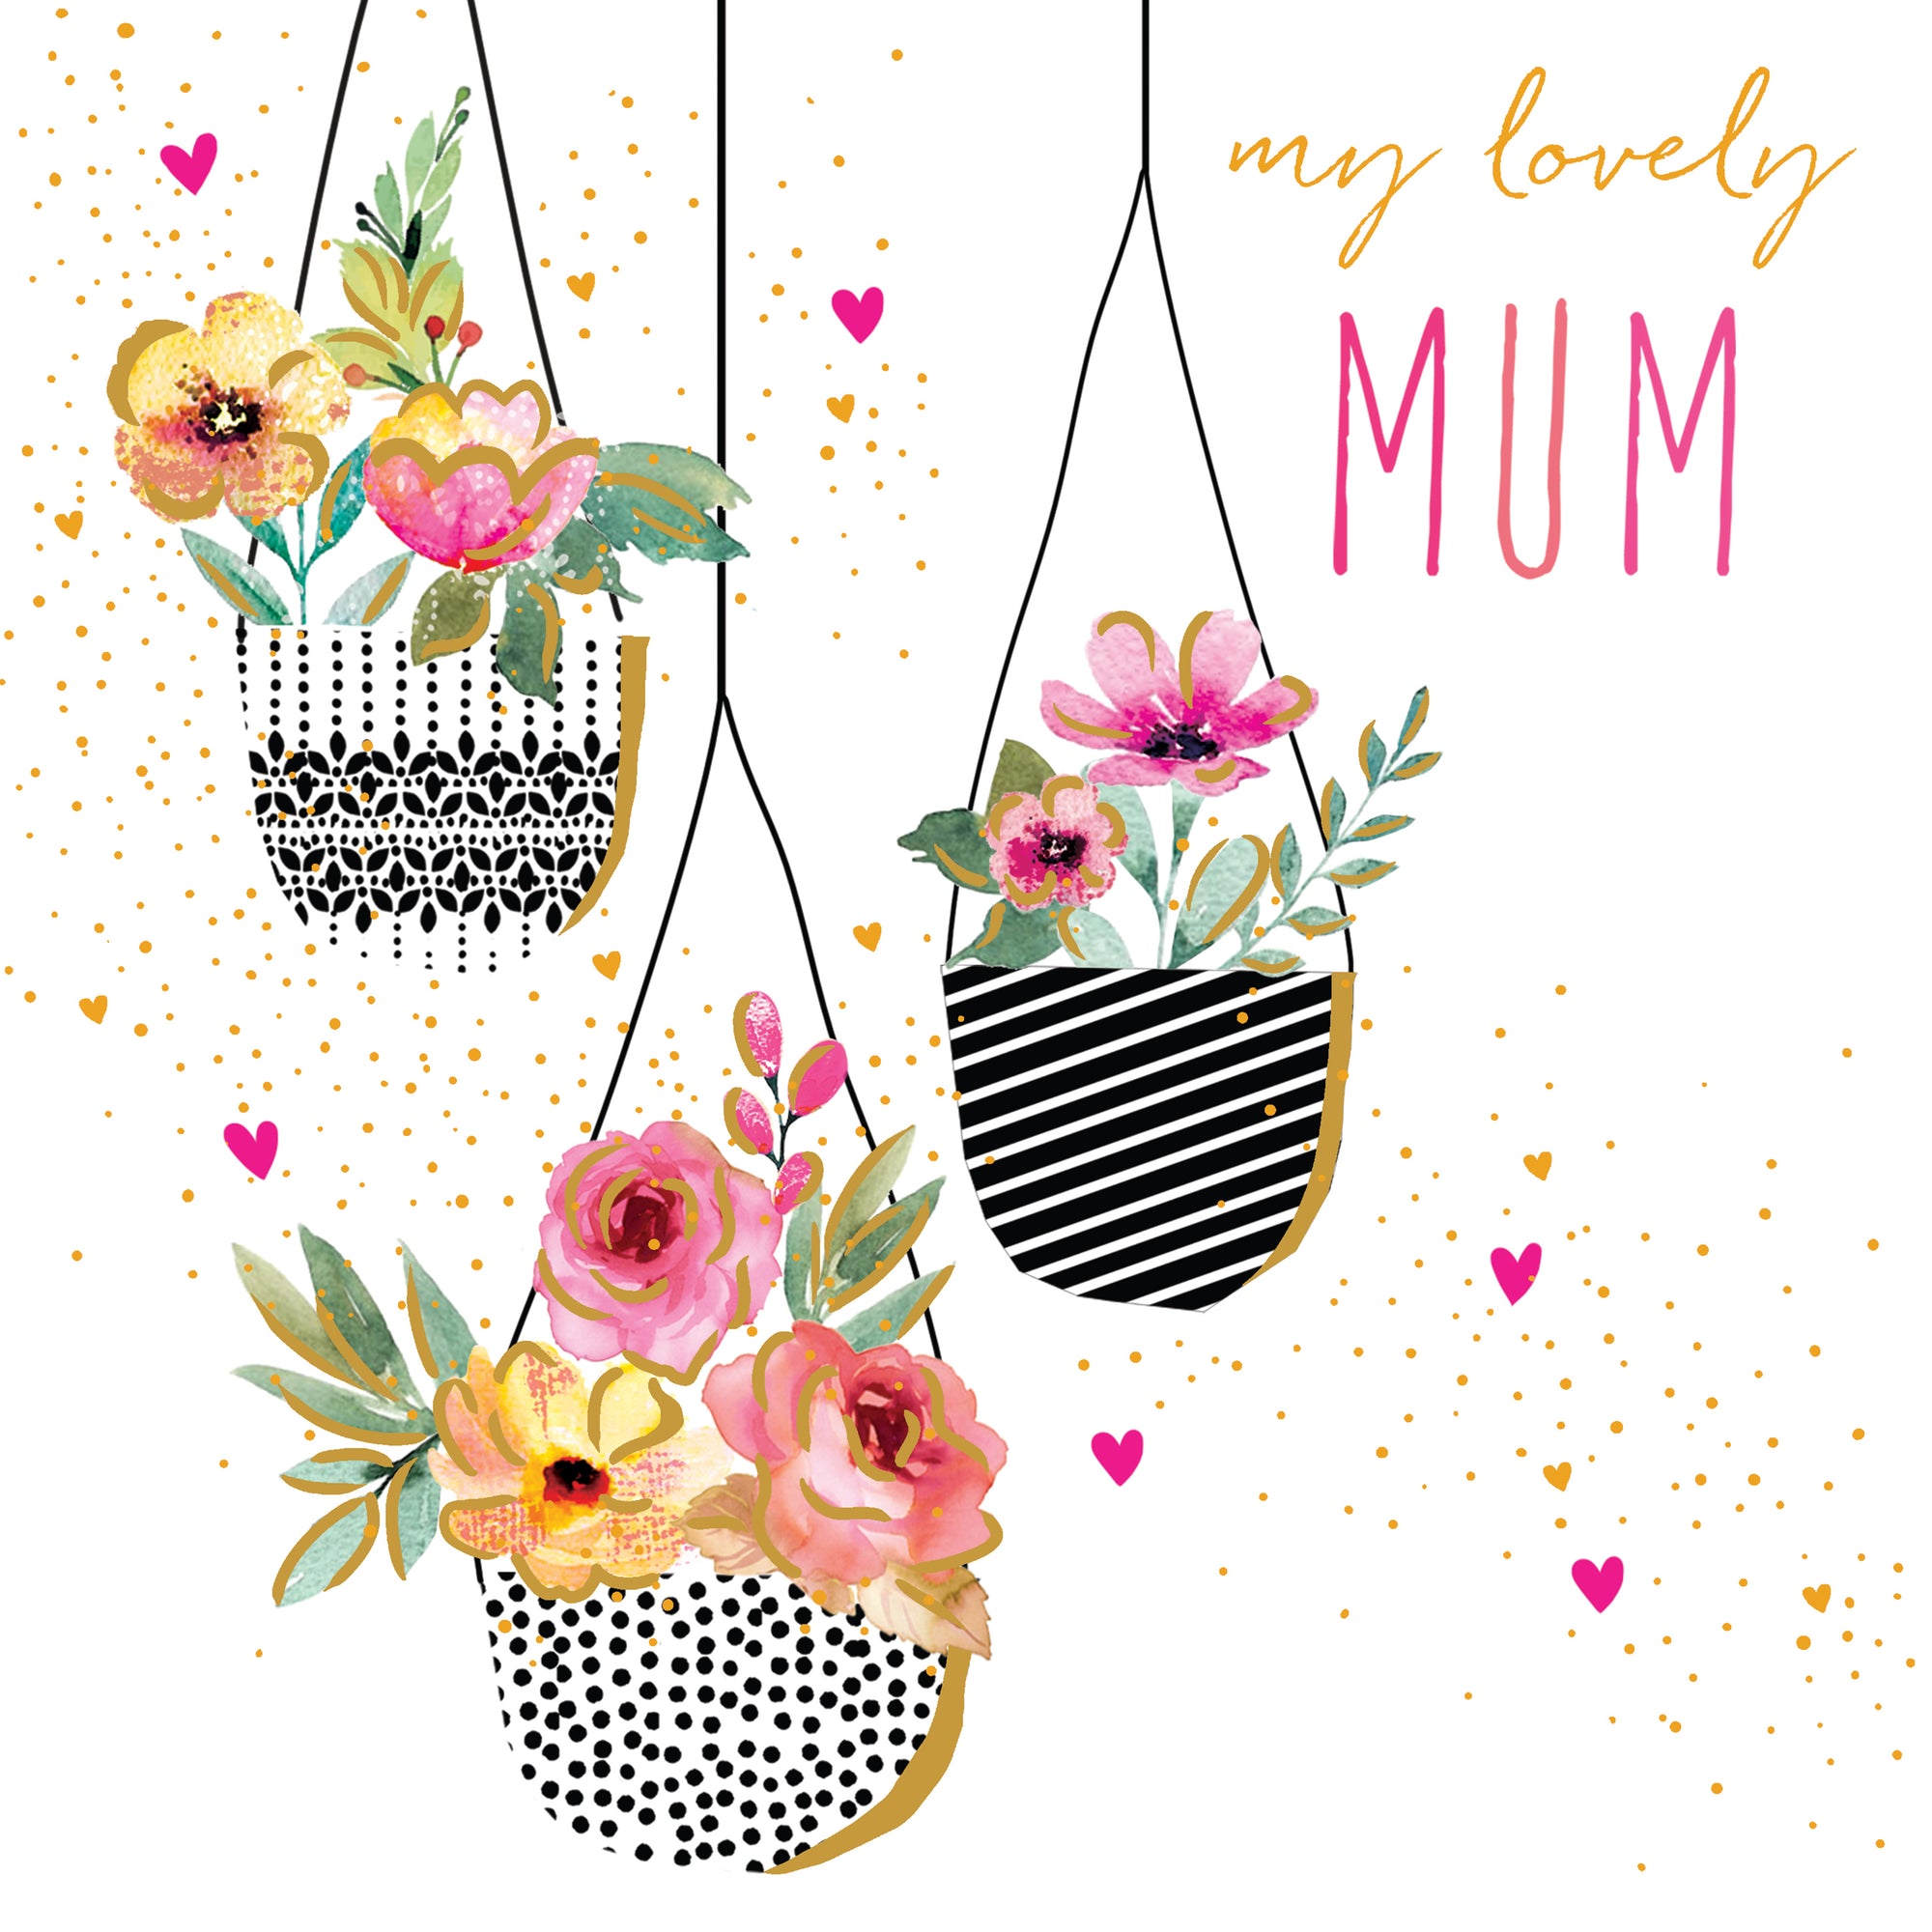 Lovely Mum Hanging Baskets Mother's Day Card by penny black